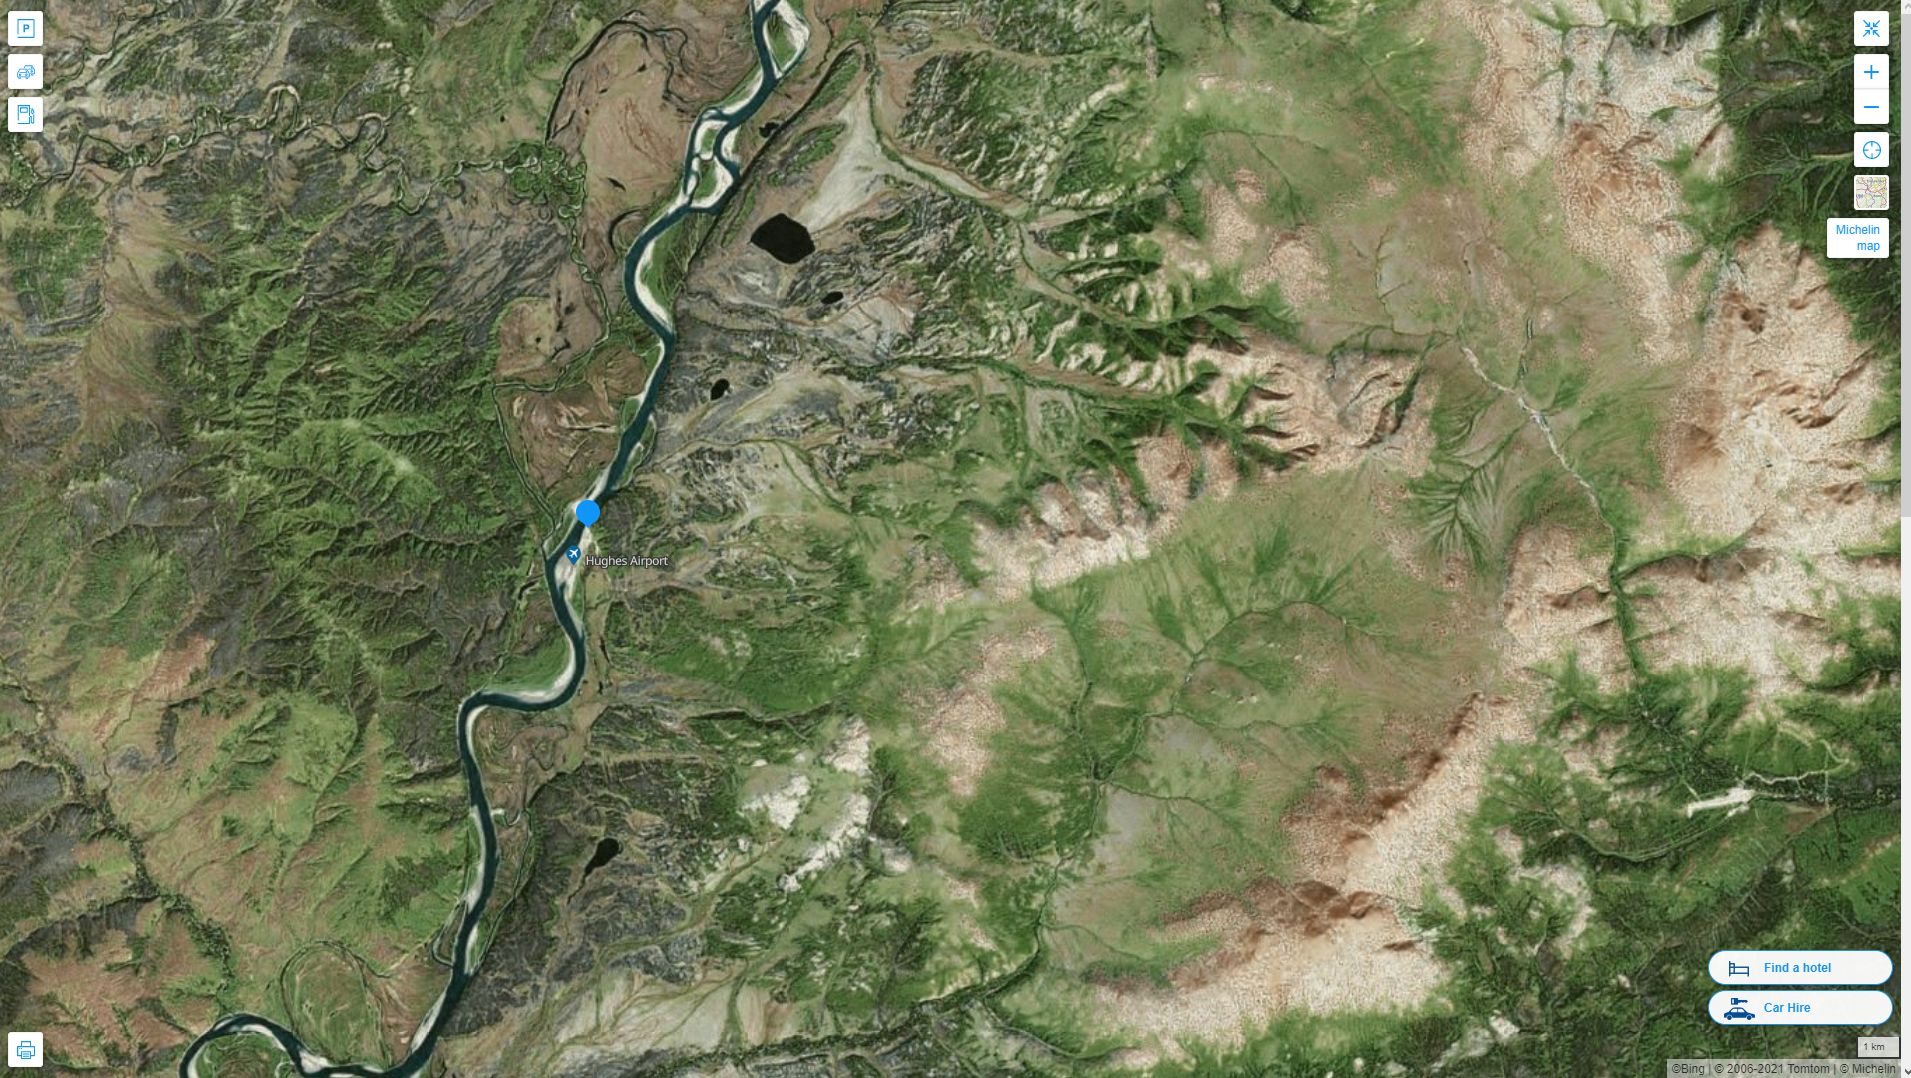 Hughes Alaska Highway and Road Map with Satellite View